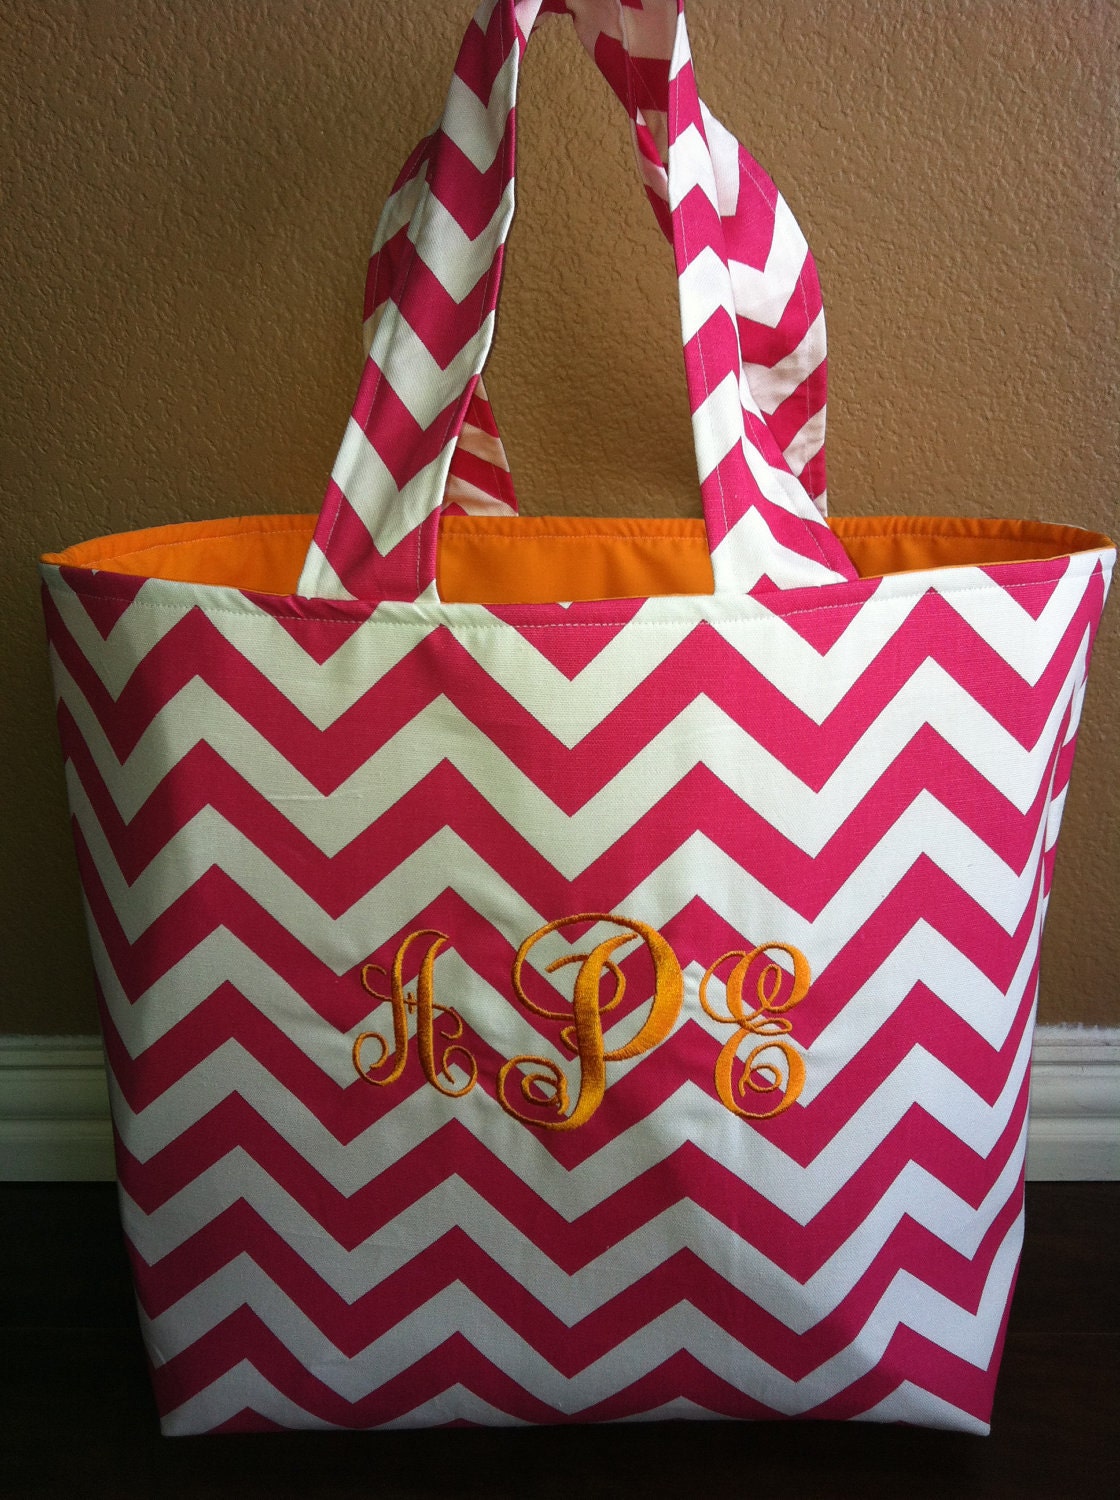 Candy Pink and White Large Monogramed Chevron Tote